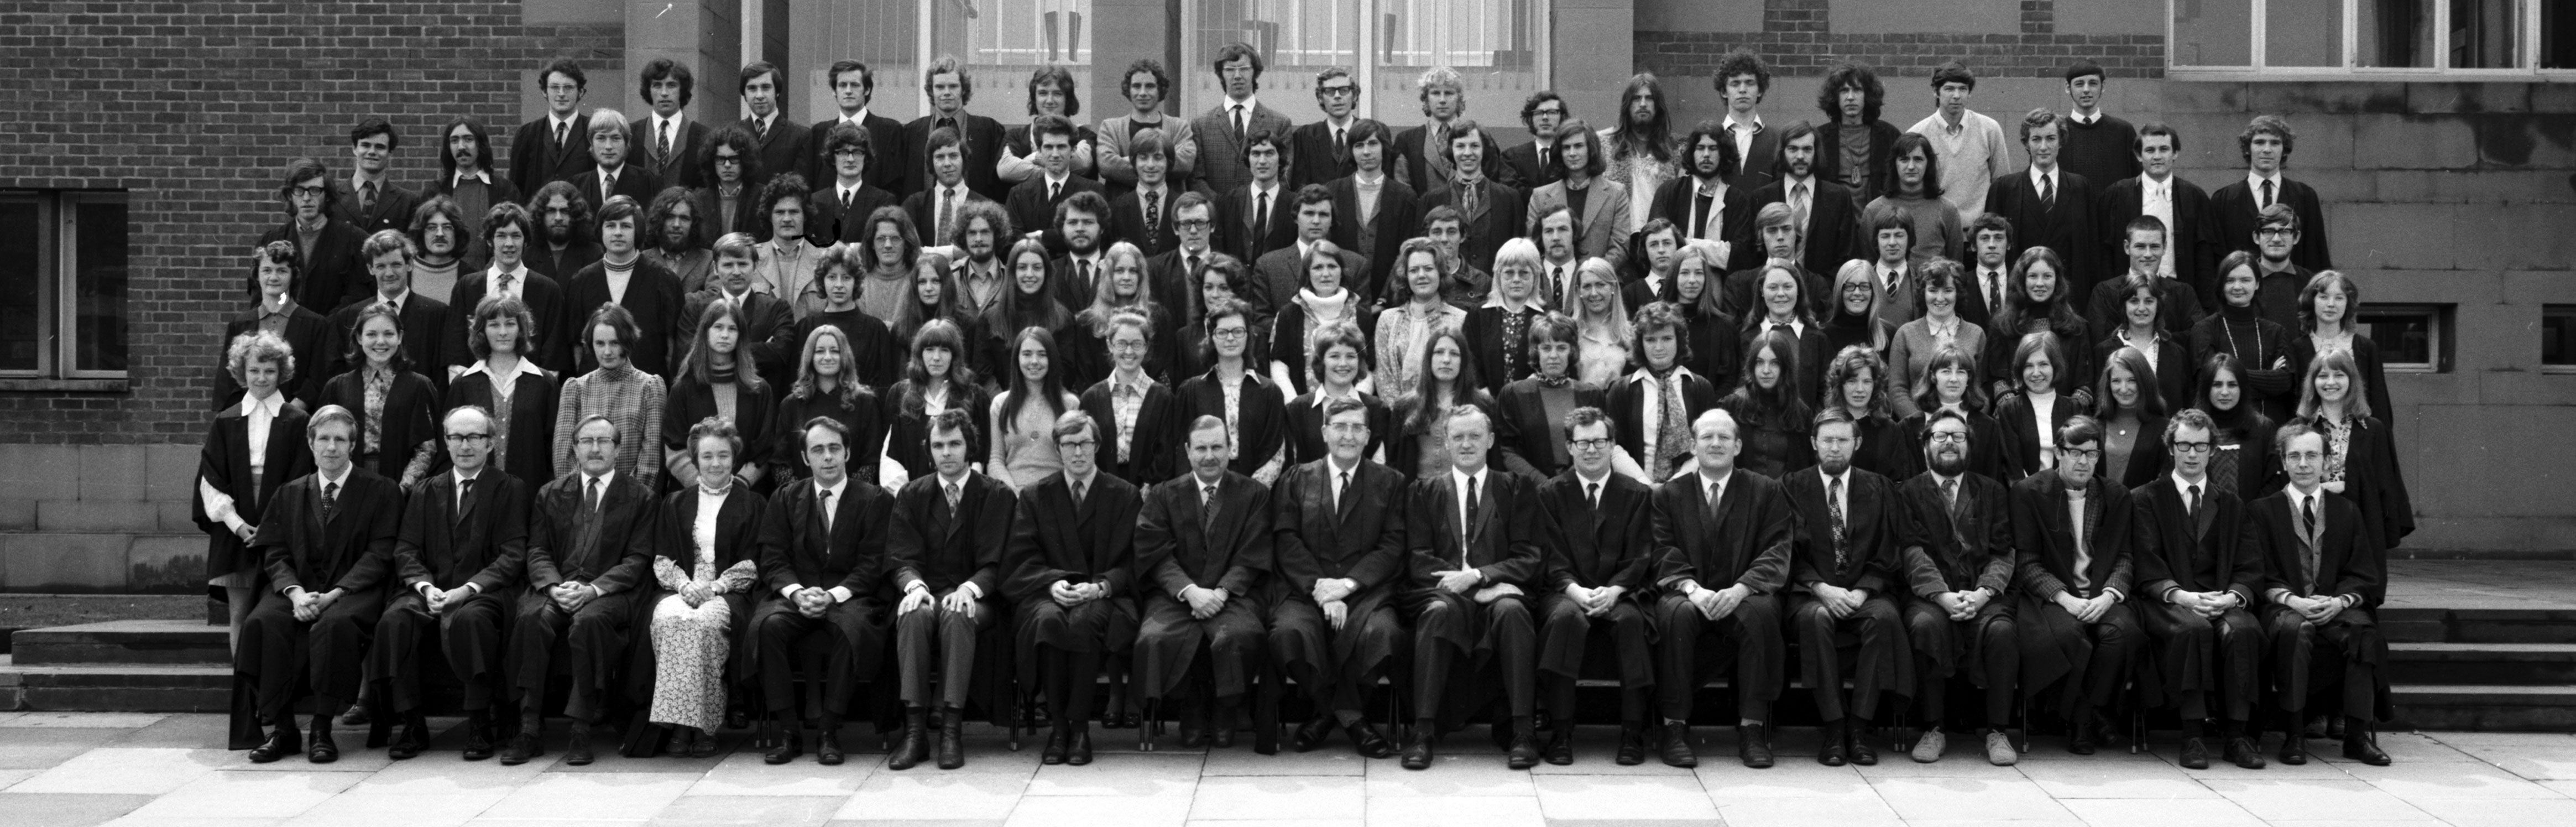 Geography Department Undergraduate Group photo from 1972